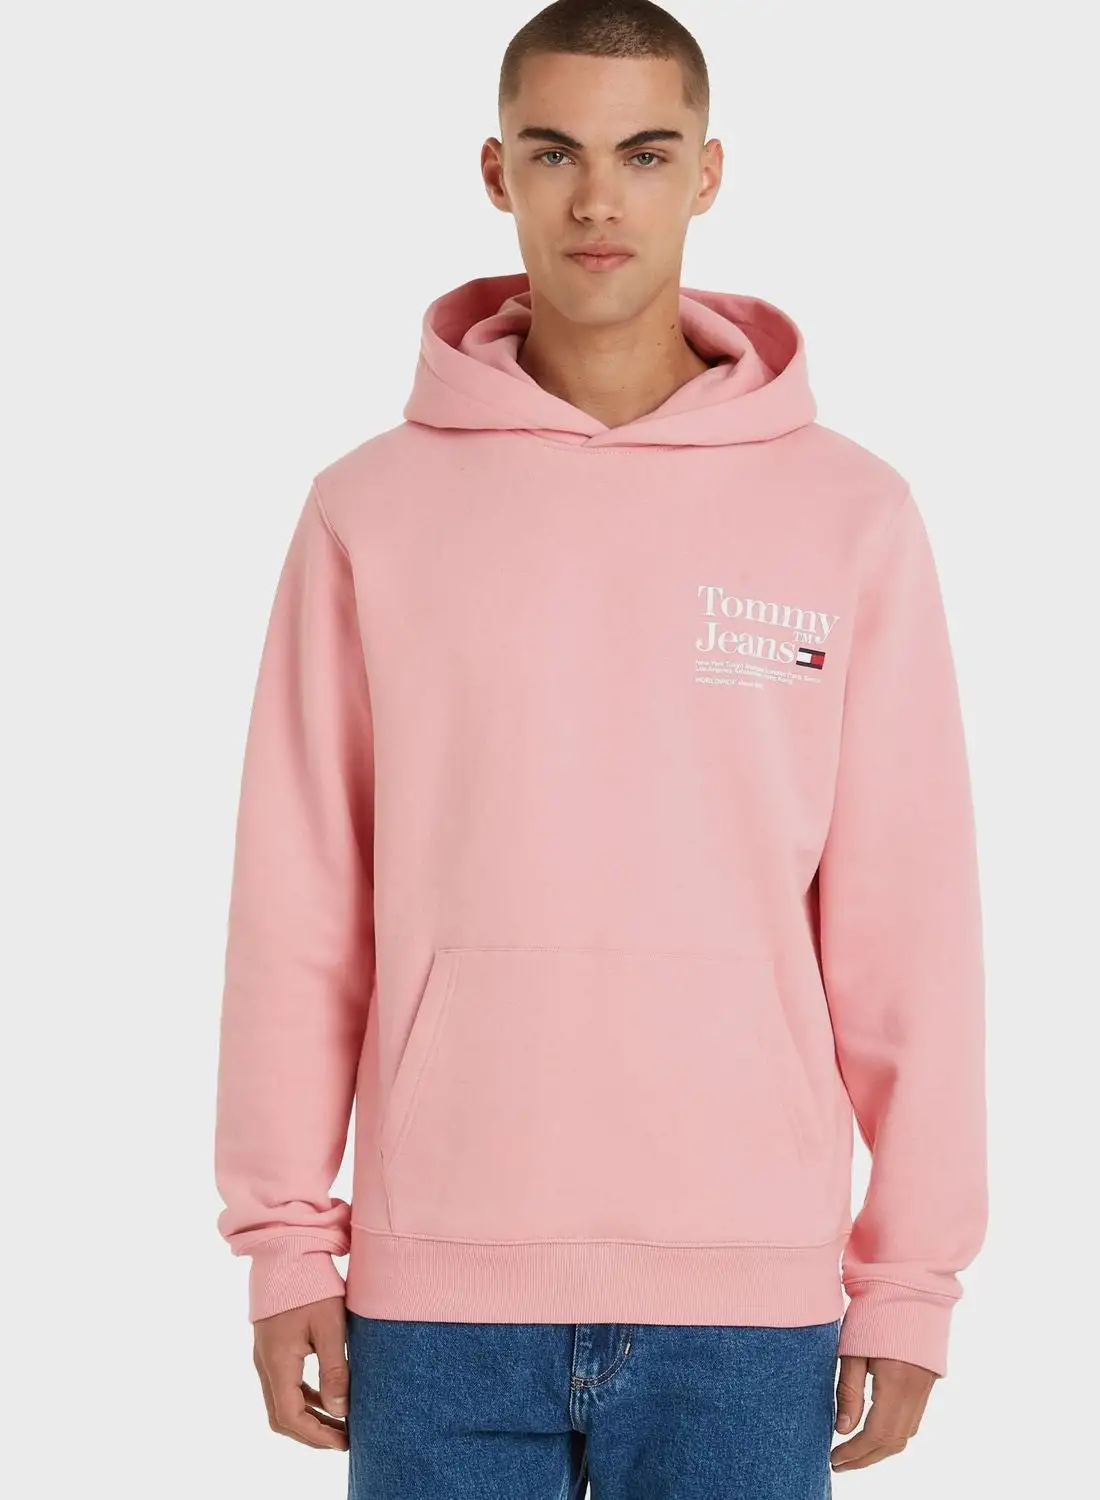 TOMMY JEANS Text Print Modern Hoodie